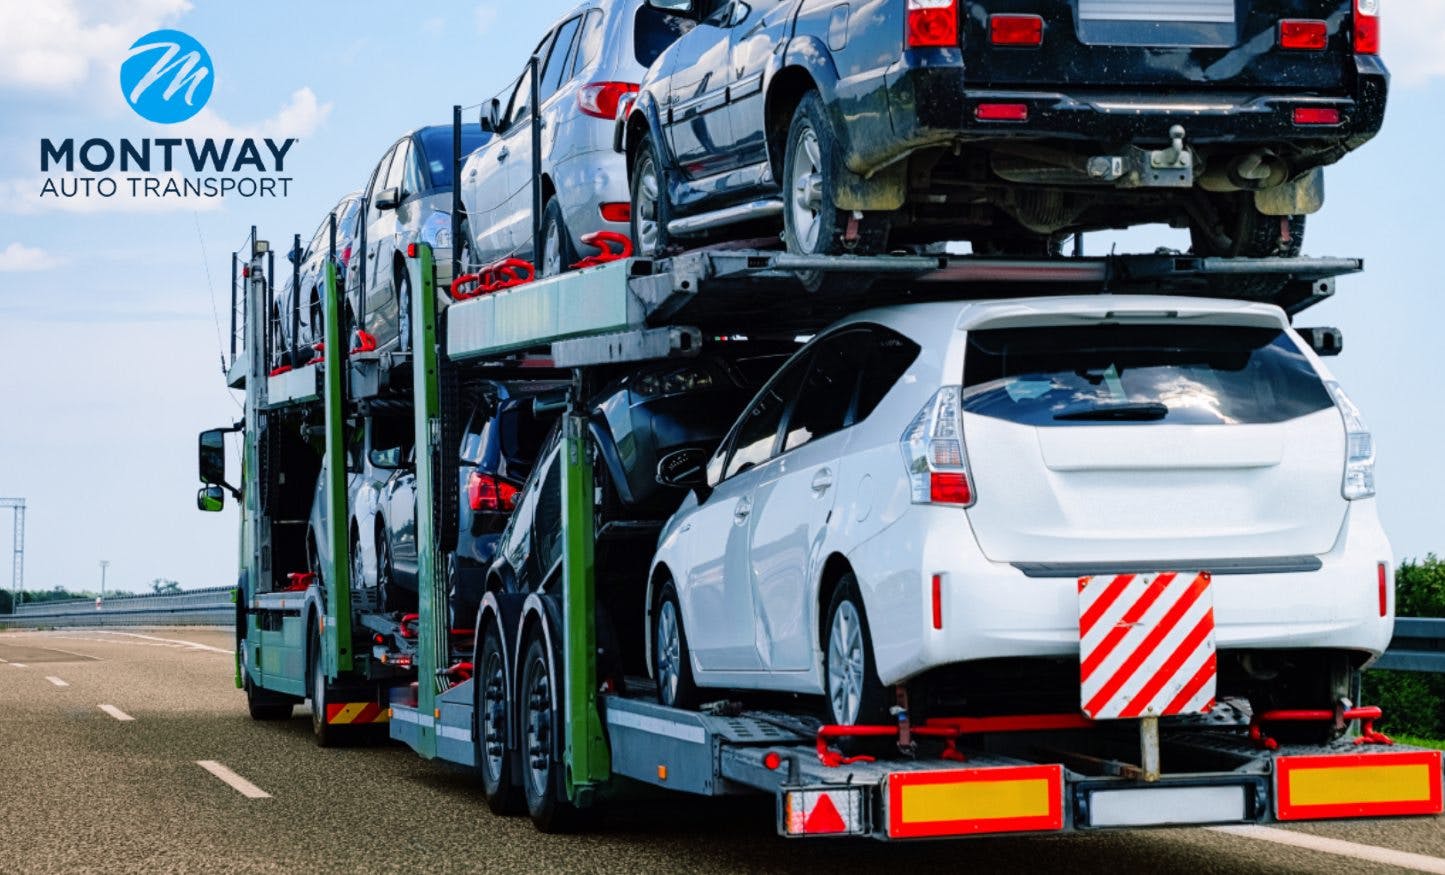 Montway Auto Transport: Your #1 Company